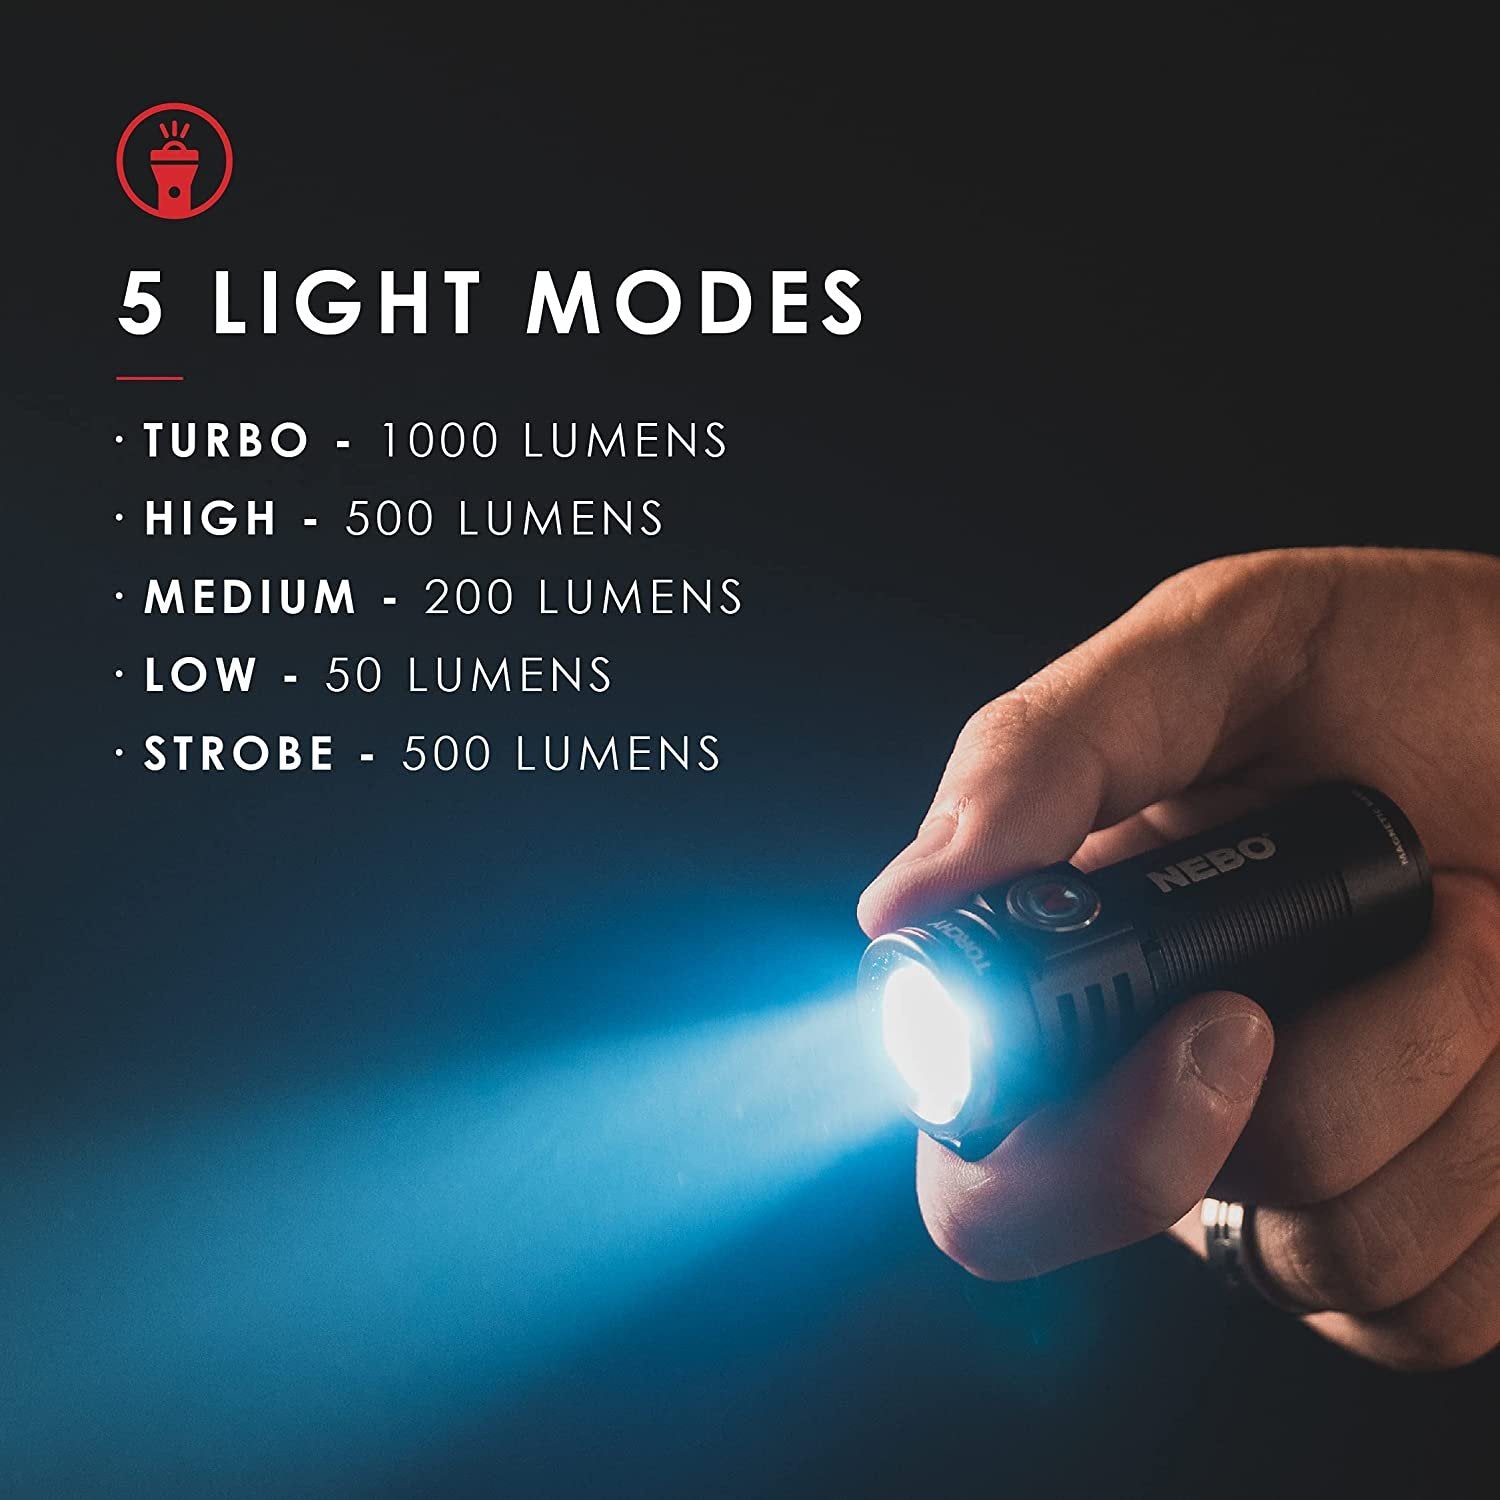 NEBO Torchy 1,000-Lumen Pocket Flashlight, LED Rechargeable Flashlight For EDC, Camping, Hunting, Hiking With 4 Light Modes, Water and Impact Resistant, Power Memory Recall, Removable Clip, Black